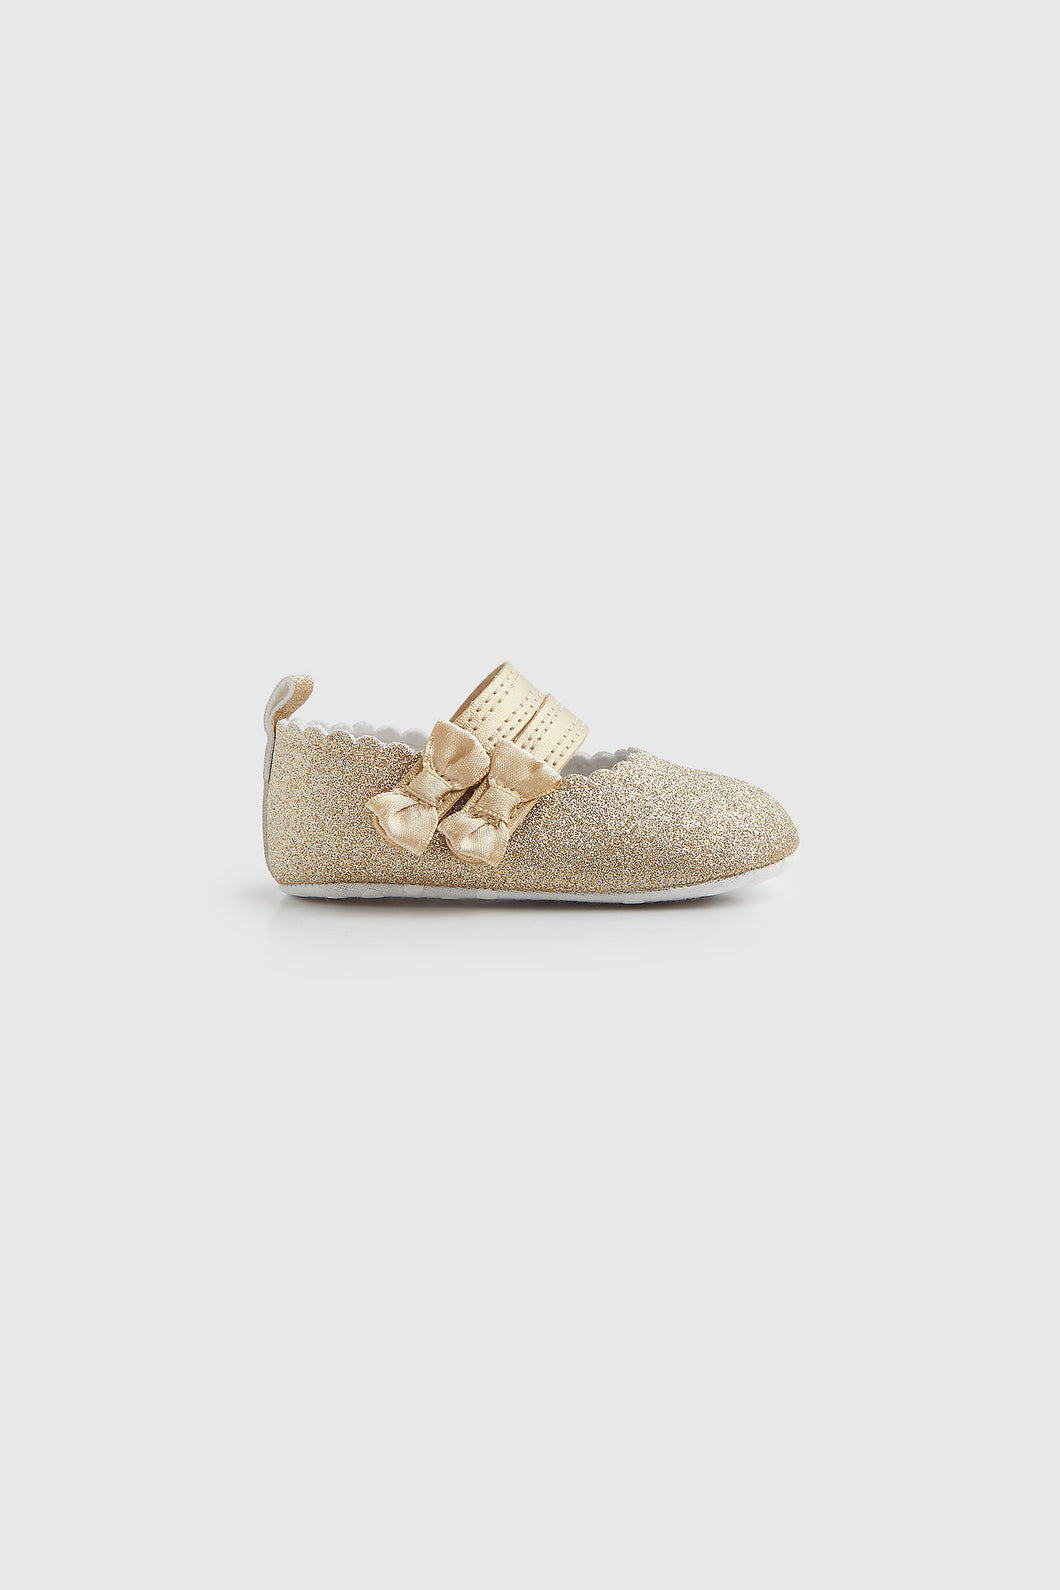 Mothercare Gold Bow Pram Shoes